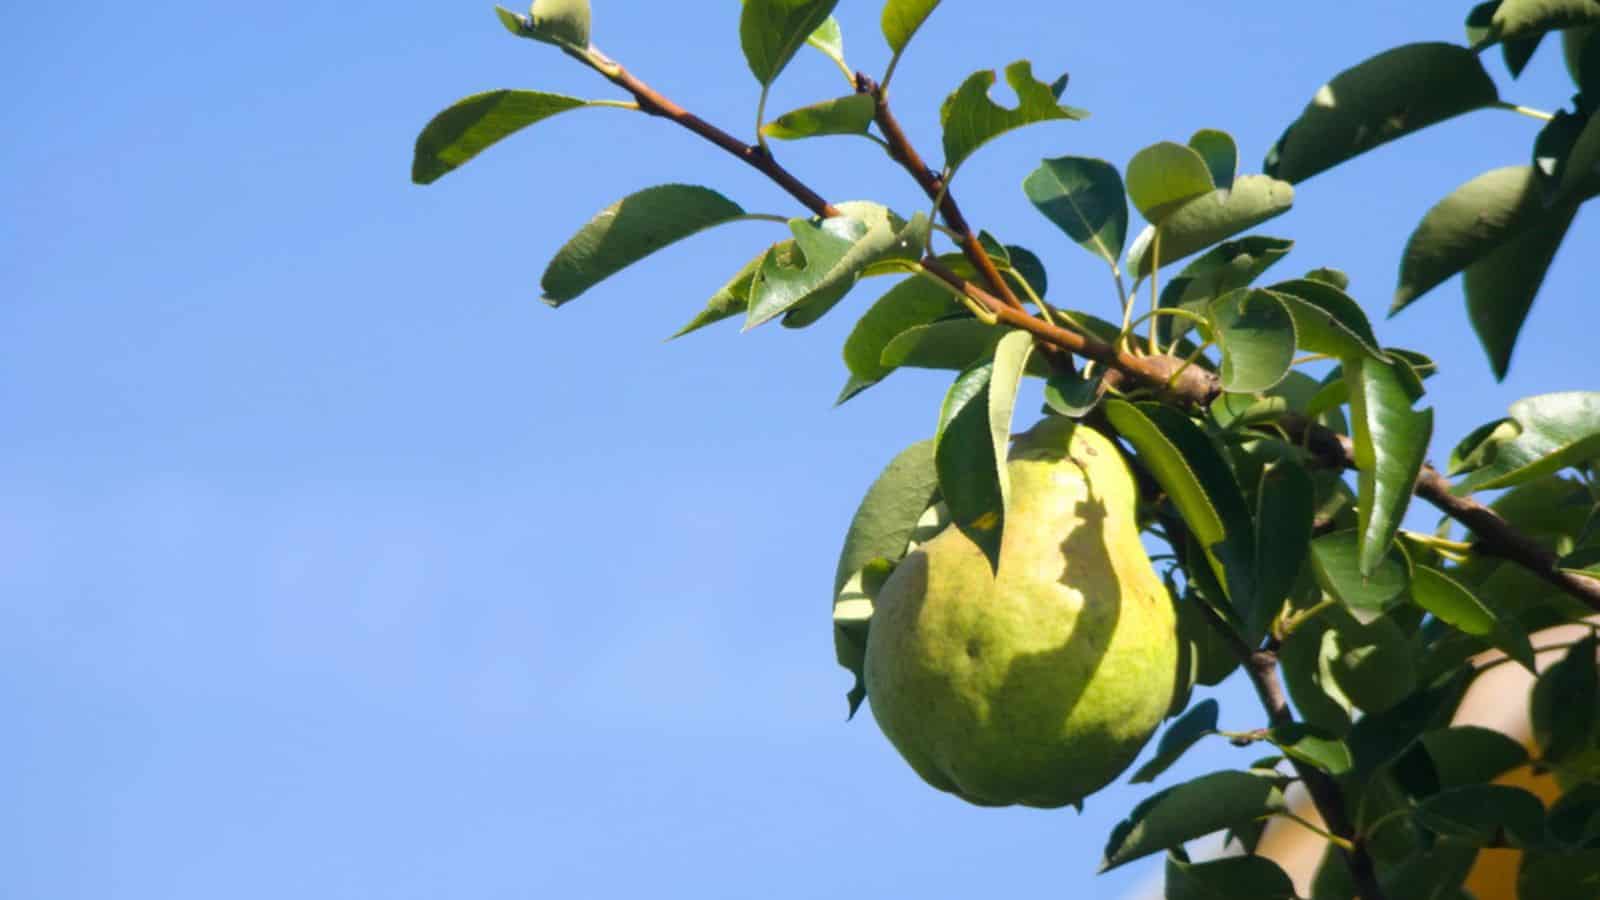 Pear on branch